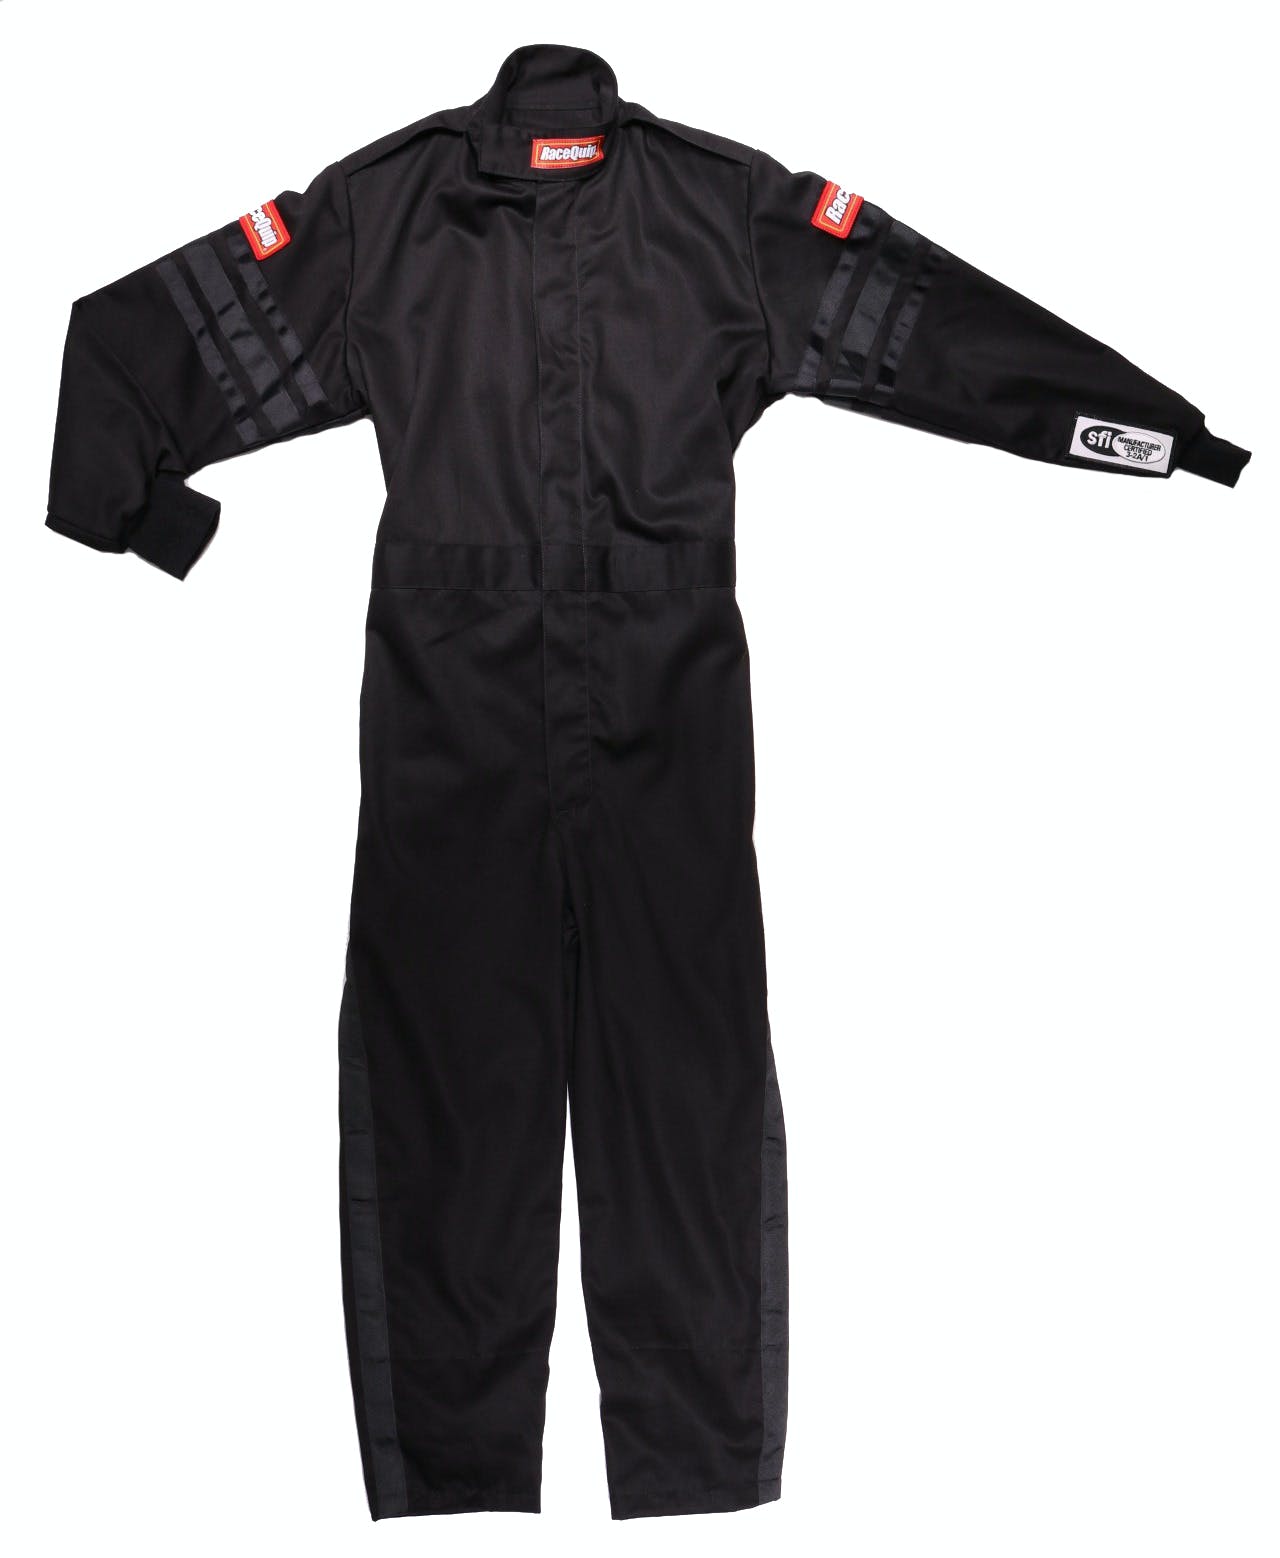 RaceQuip 1959991 SFI-1 Pyrovatex One-Piece Single-Layer Youth Racing Fire Suit (Black/Blue-XS)